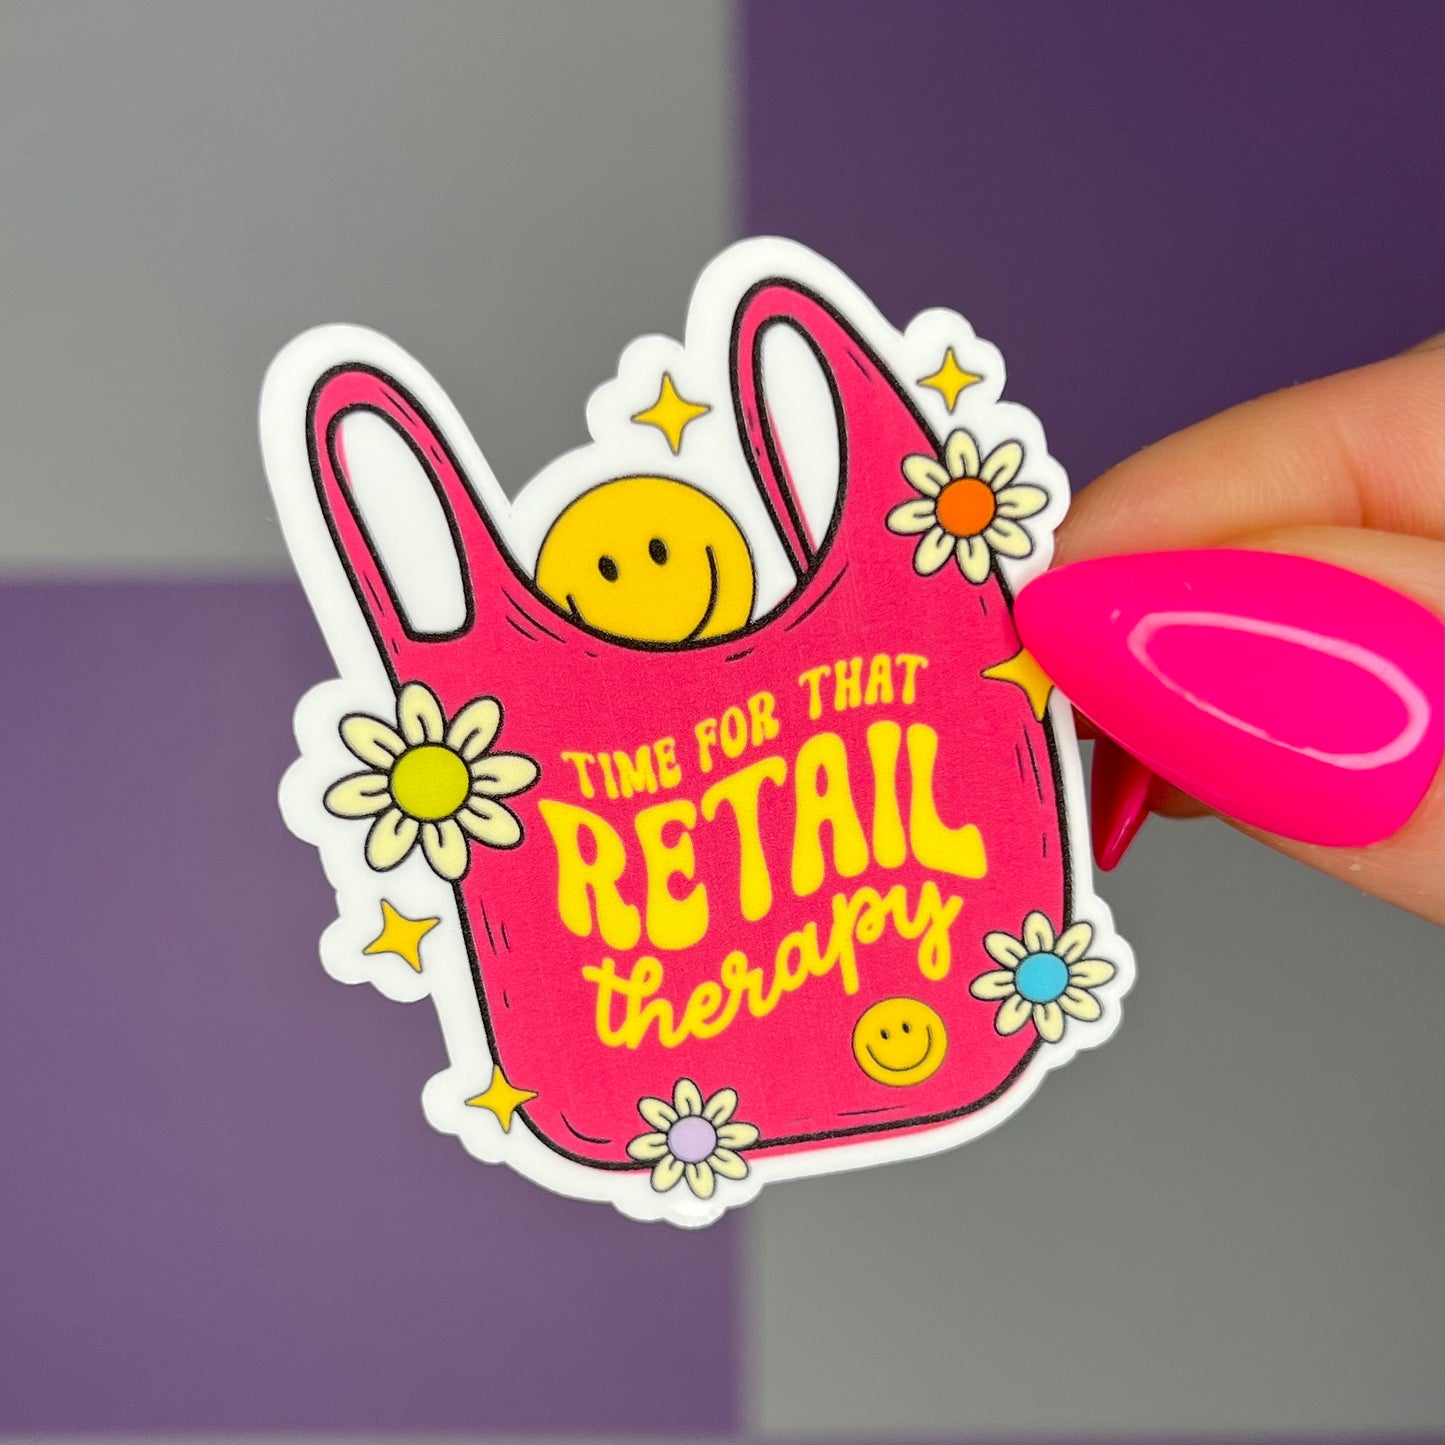 Retail Therapy Sticker